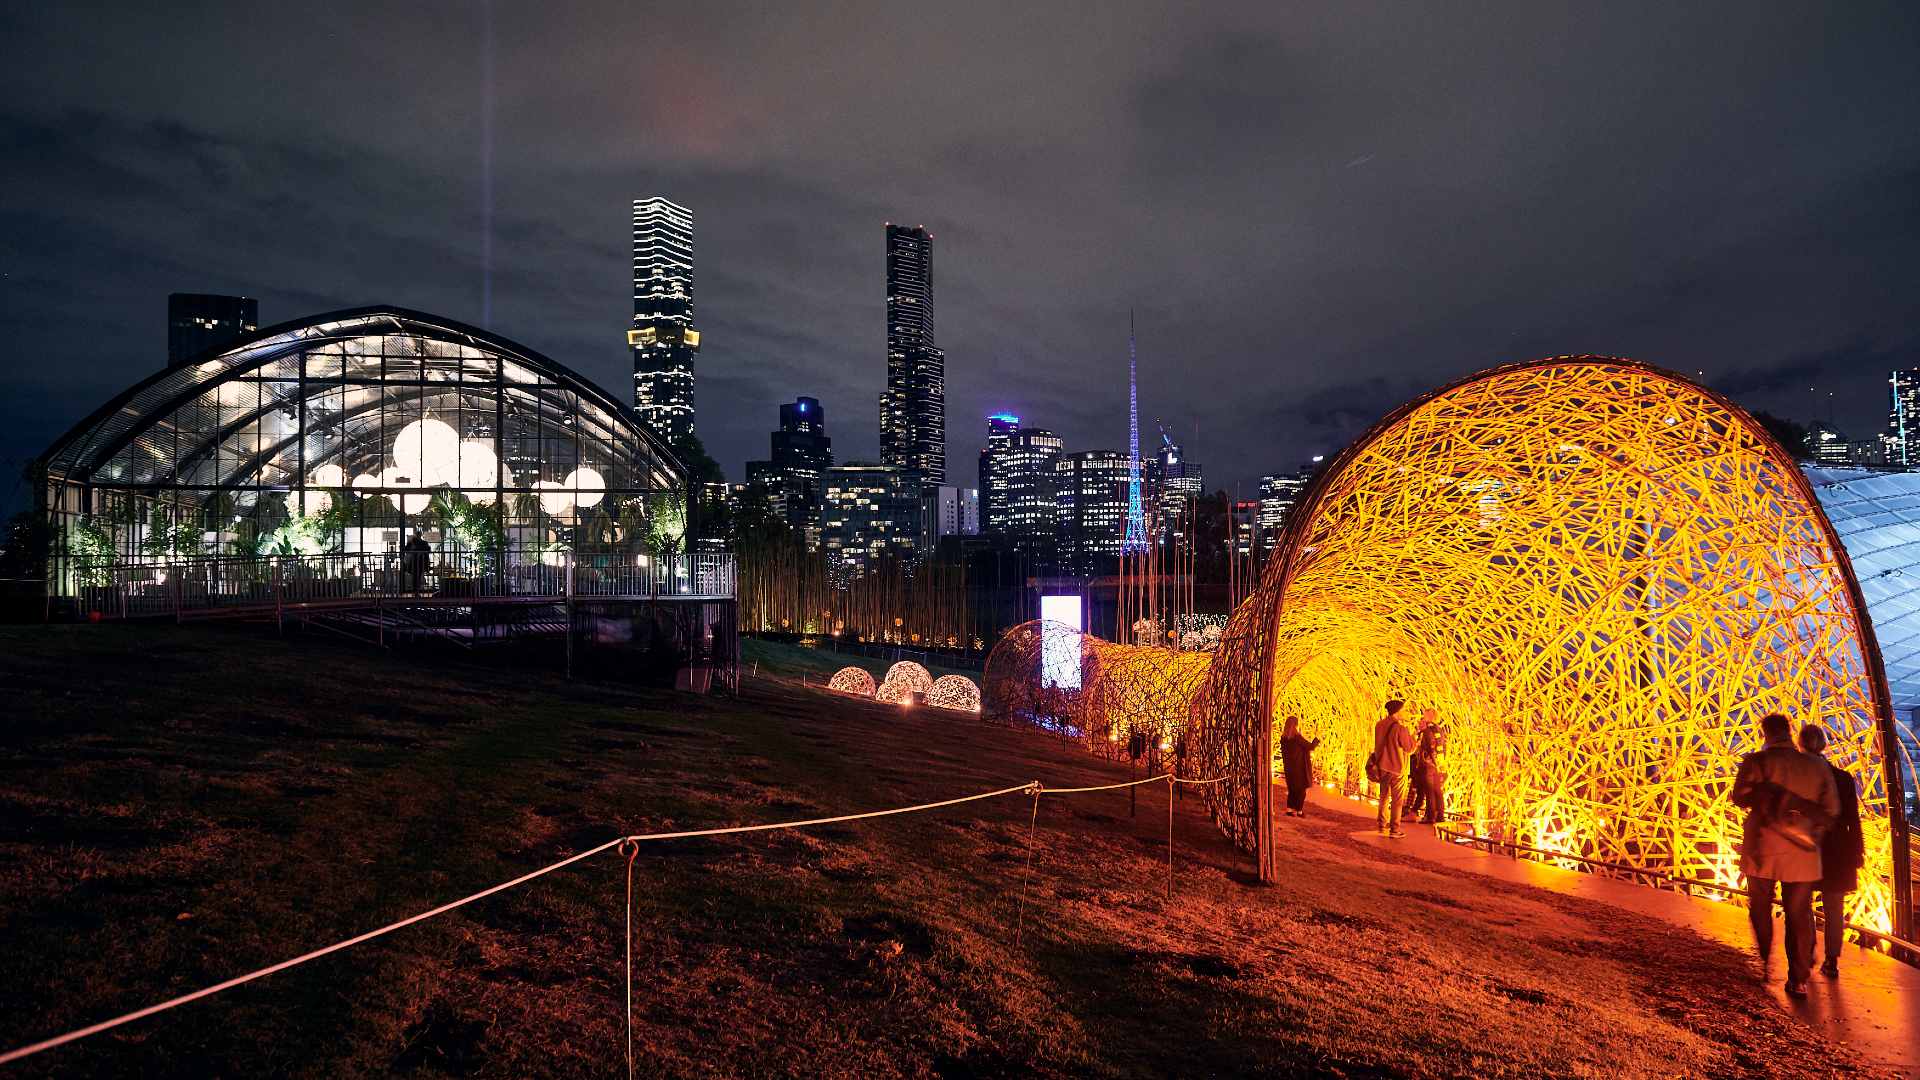 Melbourne's Blockbuster Citywide Arts Festival Rising Will Finally Make Its Proper Debut This June